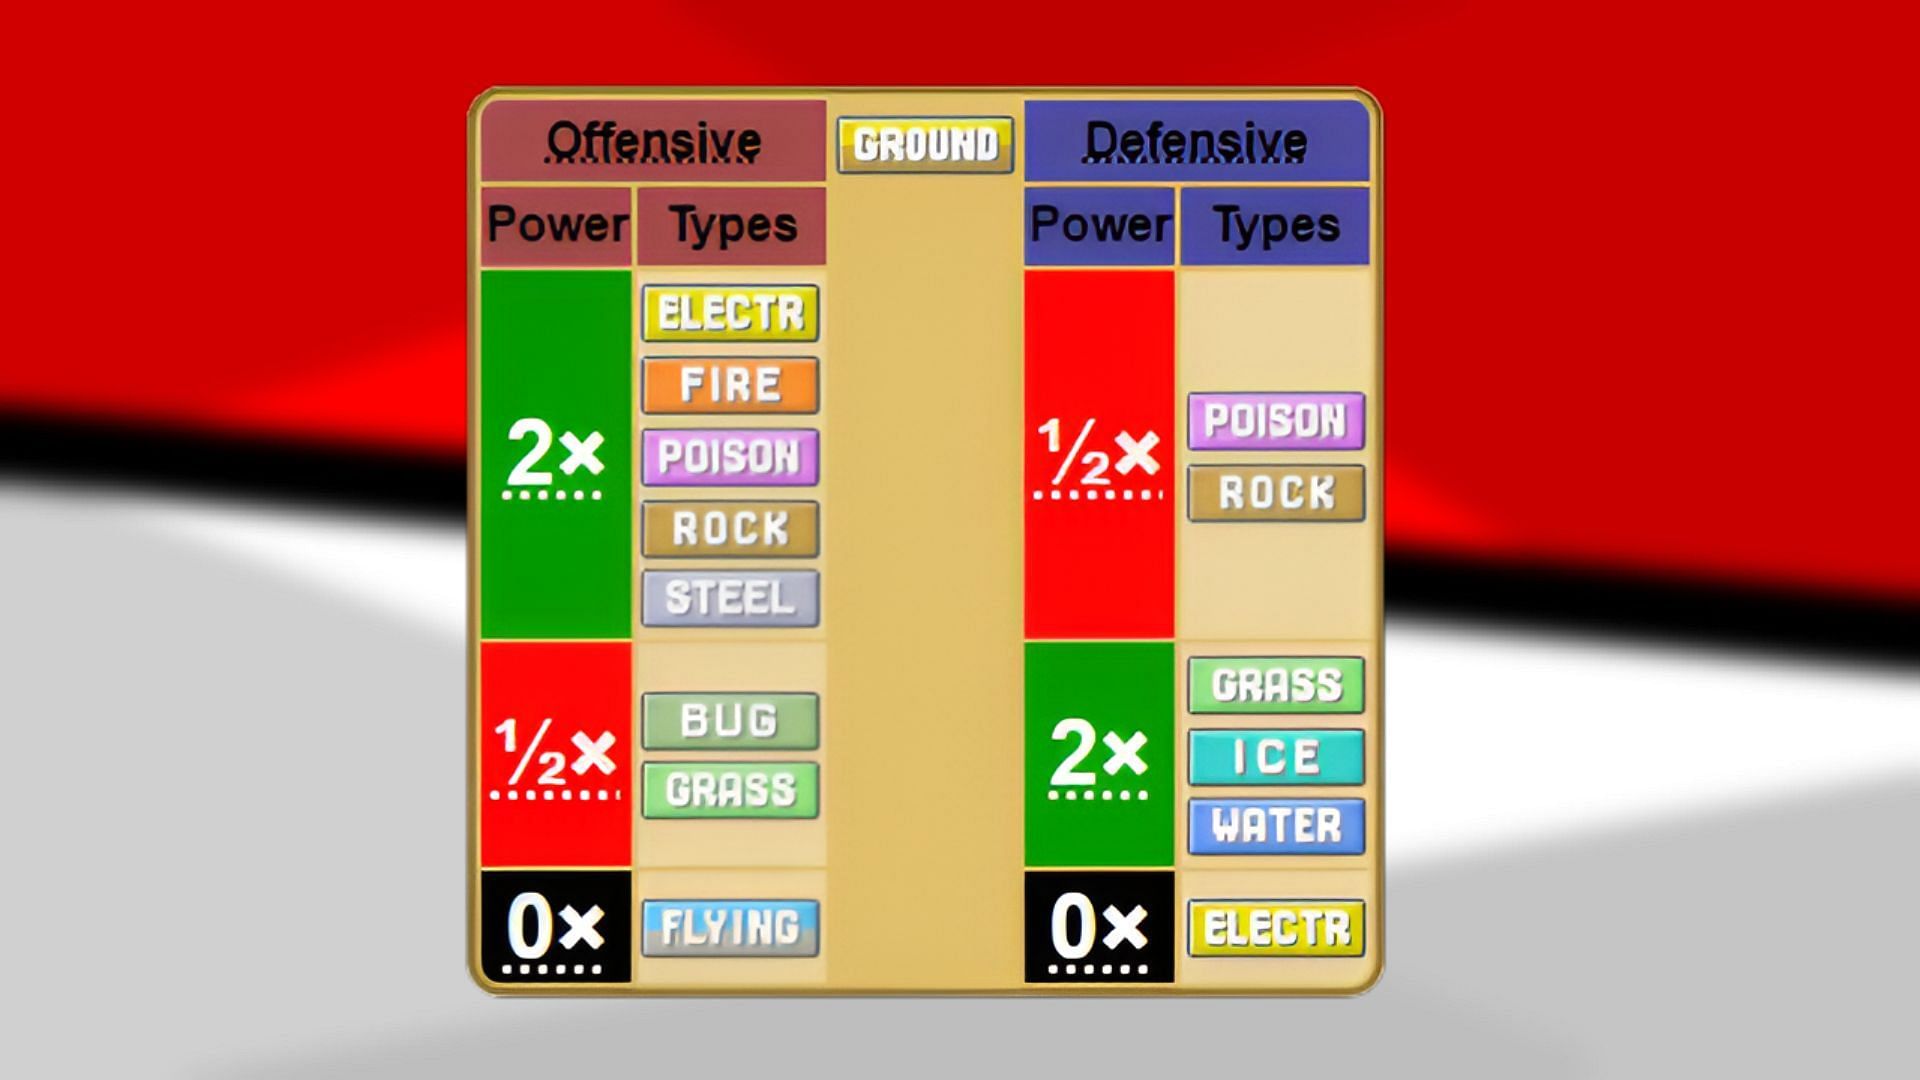 Pokemon Scarlet and Violet Type Chart for strengths and weaknesses